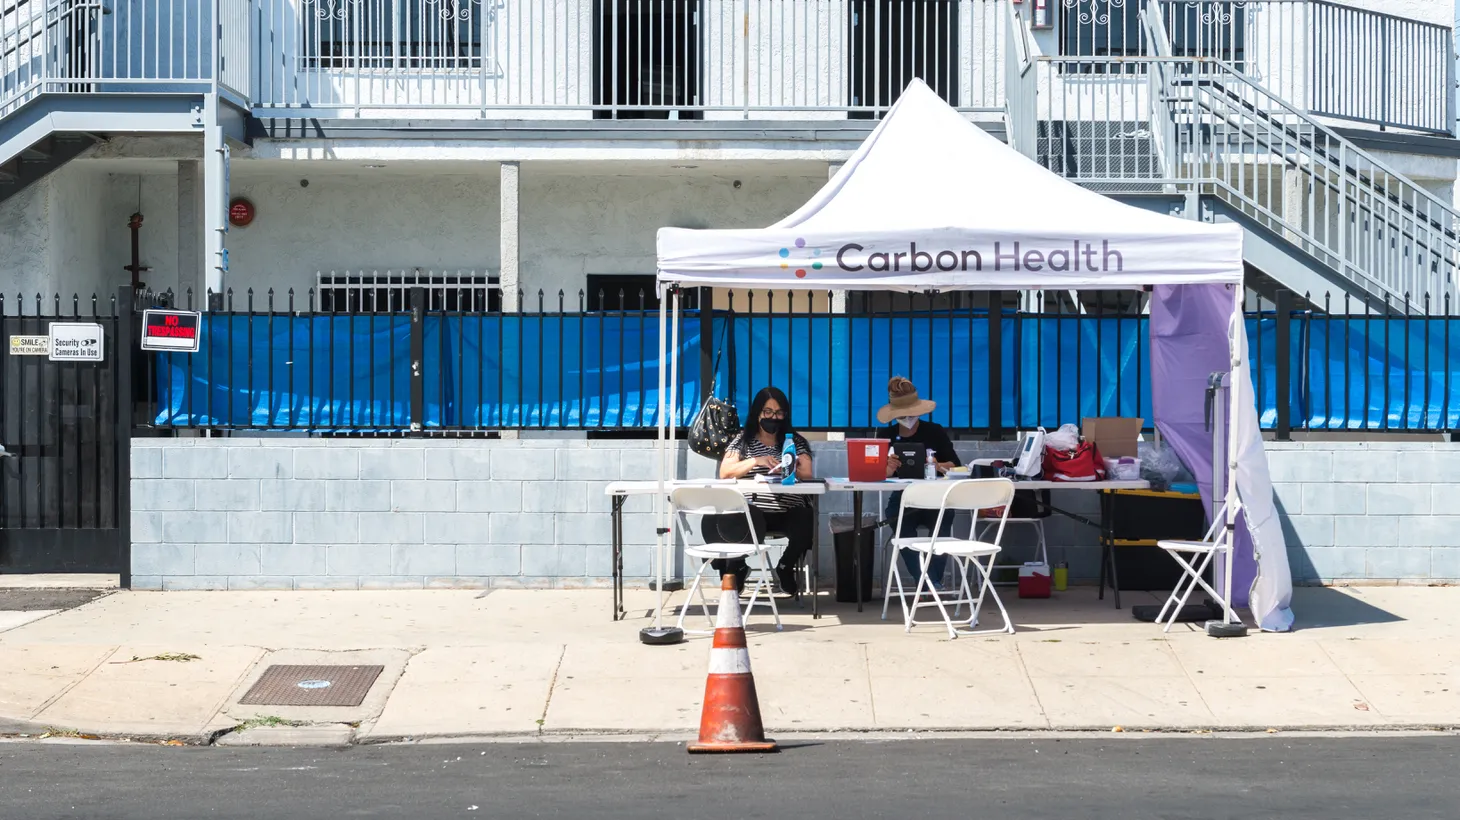 Nurse Gita Ahadi and community organizer Mari Mercado wait for people to show up at Carbon Health’s pop-up vaccination clinic in South Central Los Angeles, across the street from South LA Cafe. Mercado is offering a $50 gift card to encourage people to get vaccinated.